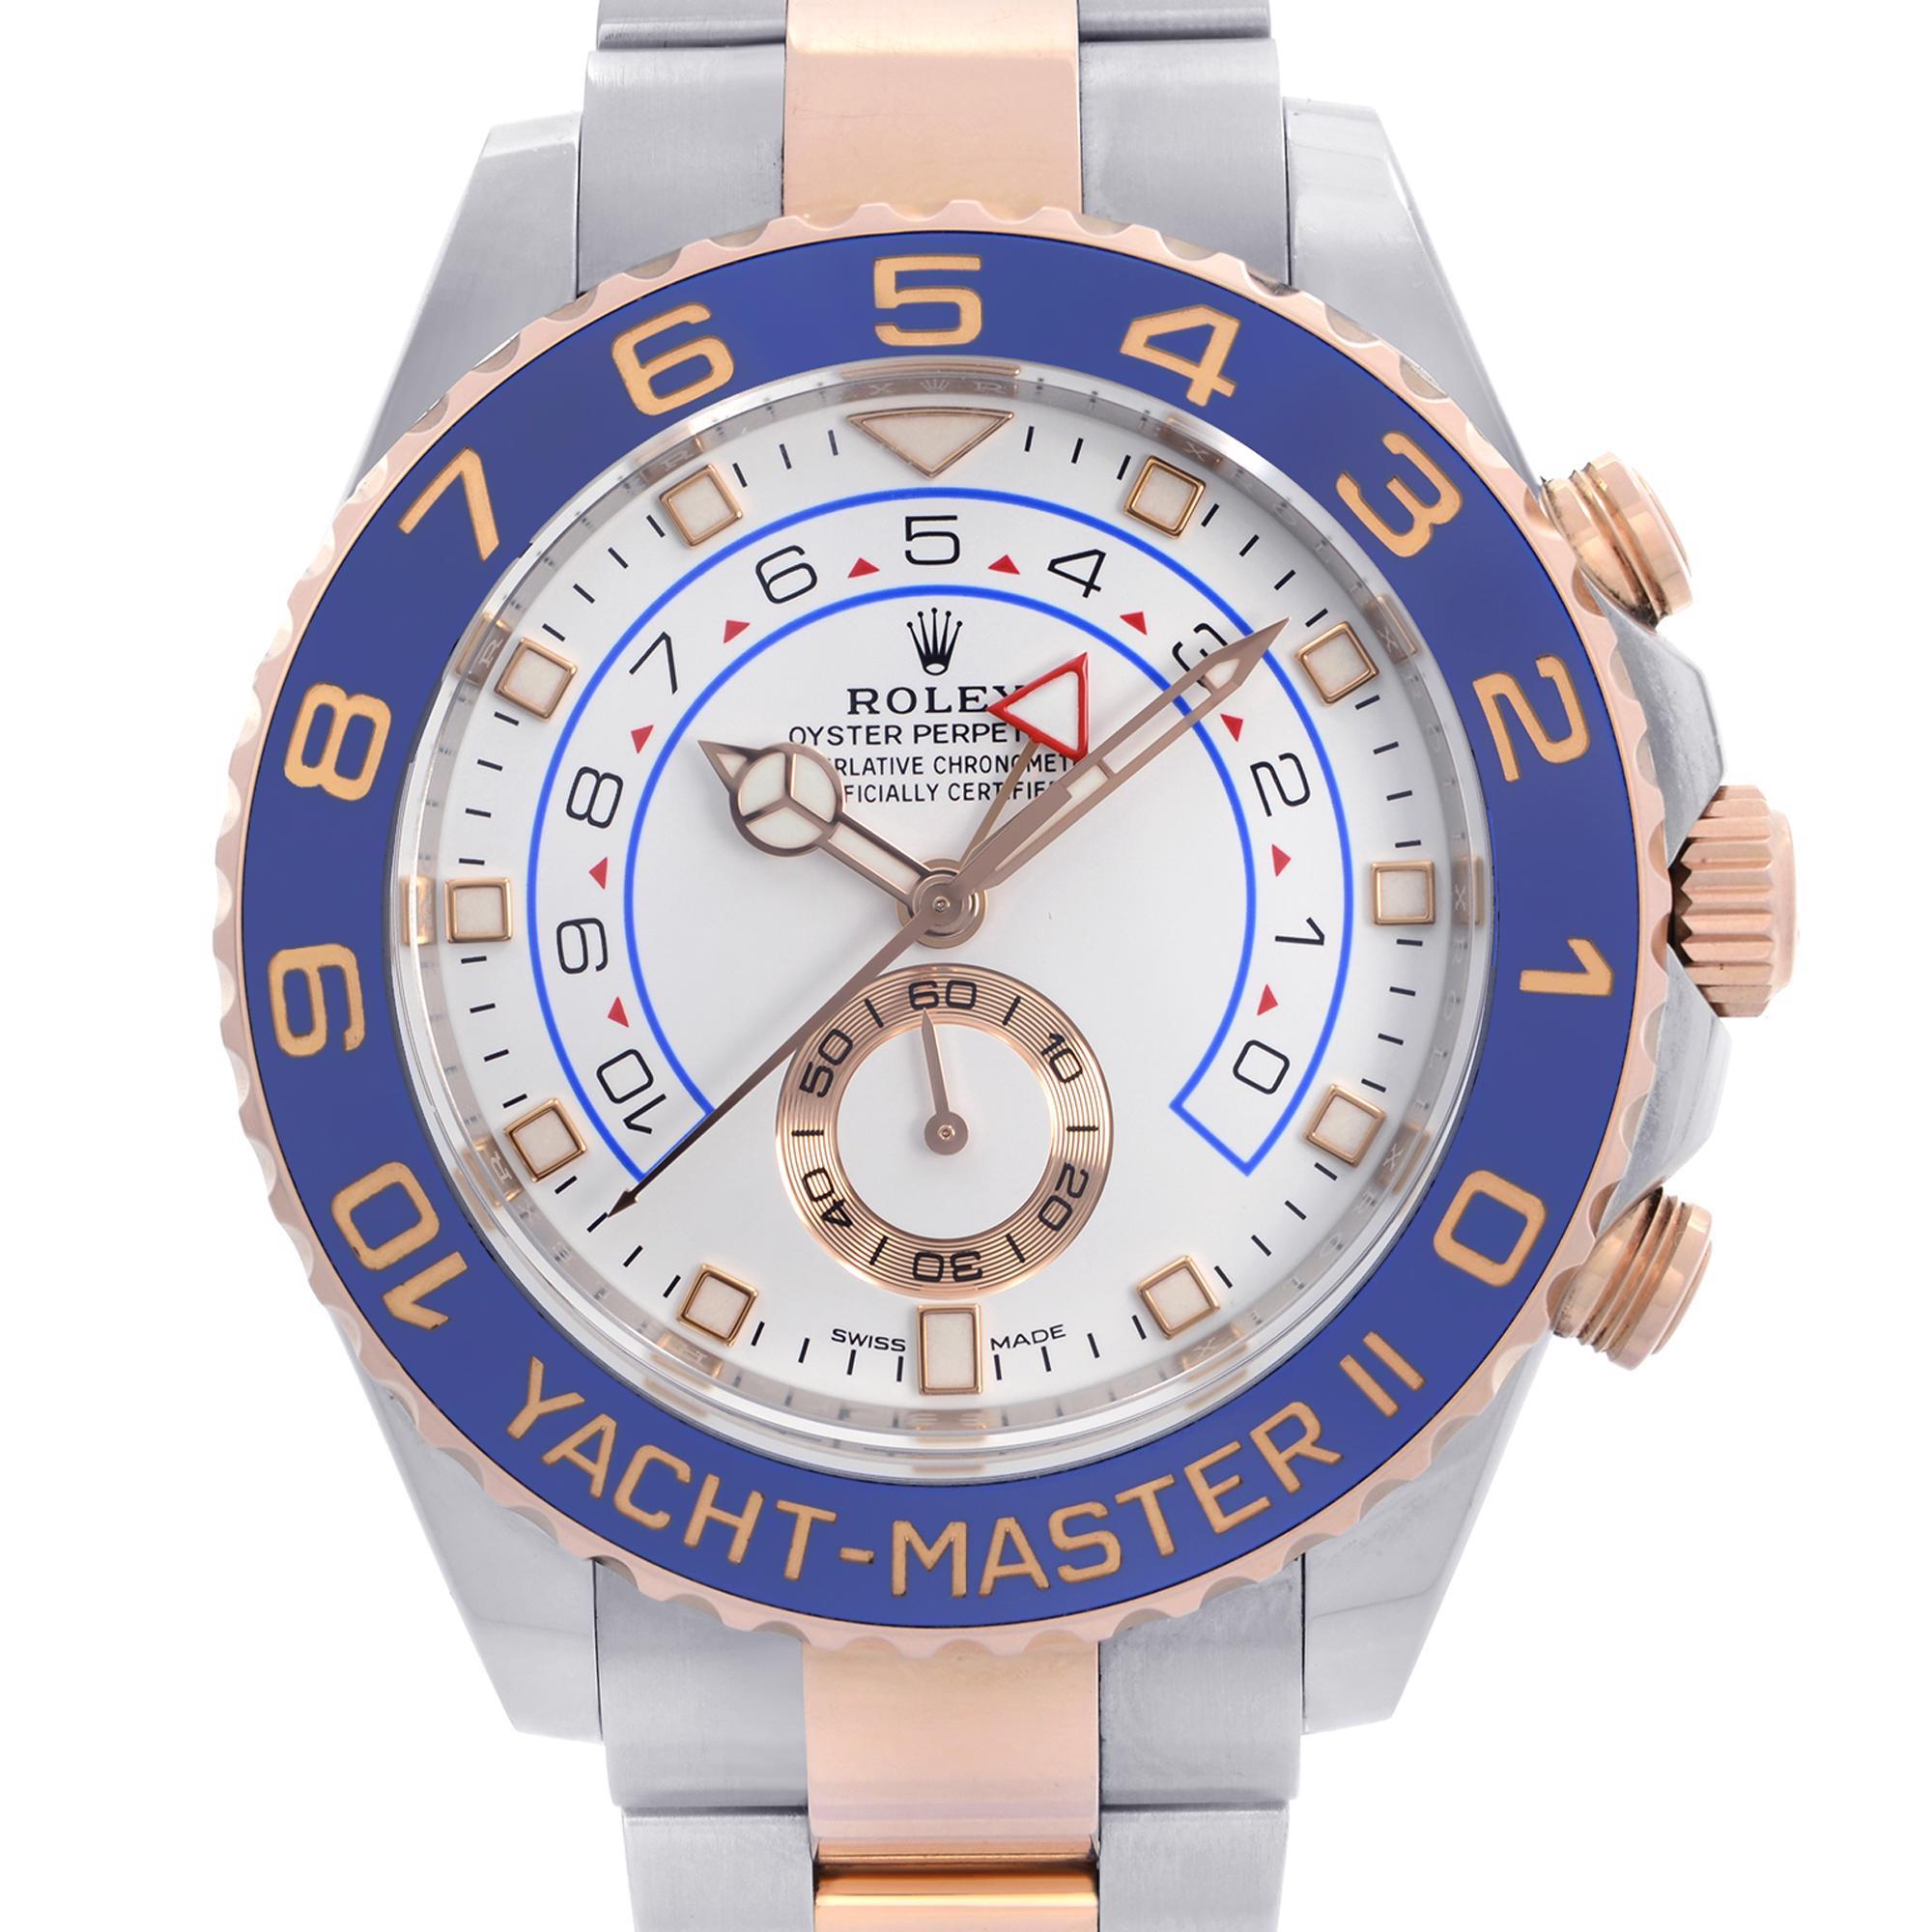 Pre-owned Scramble Serial Rolex Yacht-Master II 18k Rose Gold Steel White Dial Automatic Watch 116681. This Beautiful Timepiece is Powered By a Mechanical (Automatic) Movement and Features; Stainless Steel Case with a Two-Tone Rolex Oyster Bracelet,